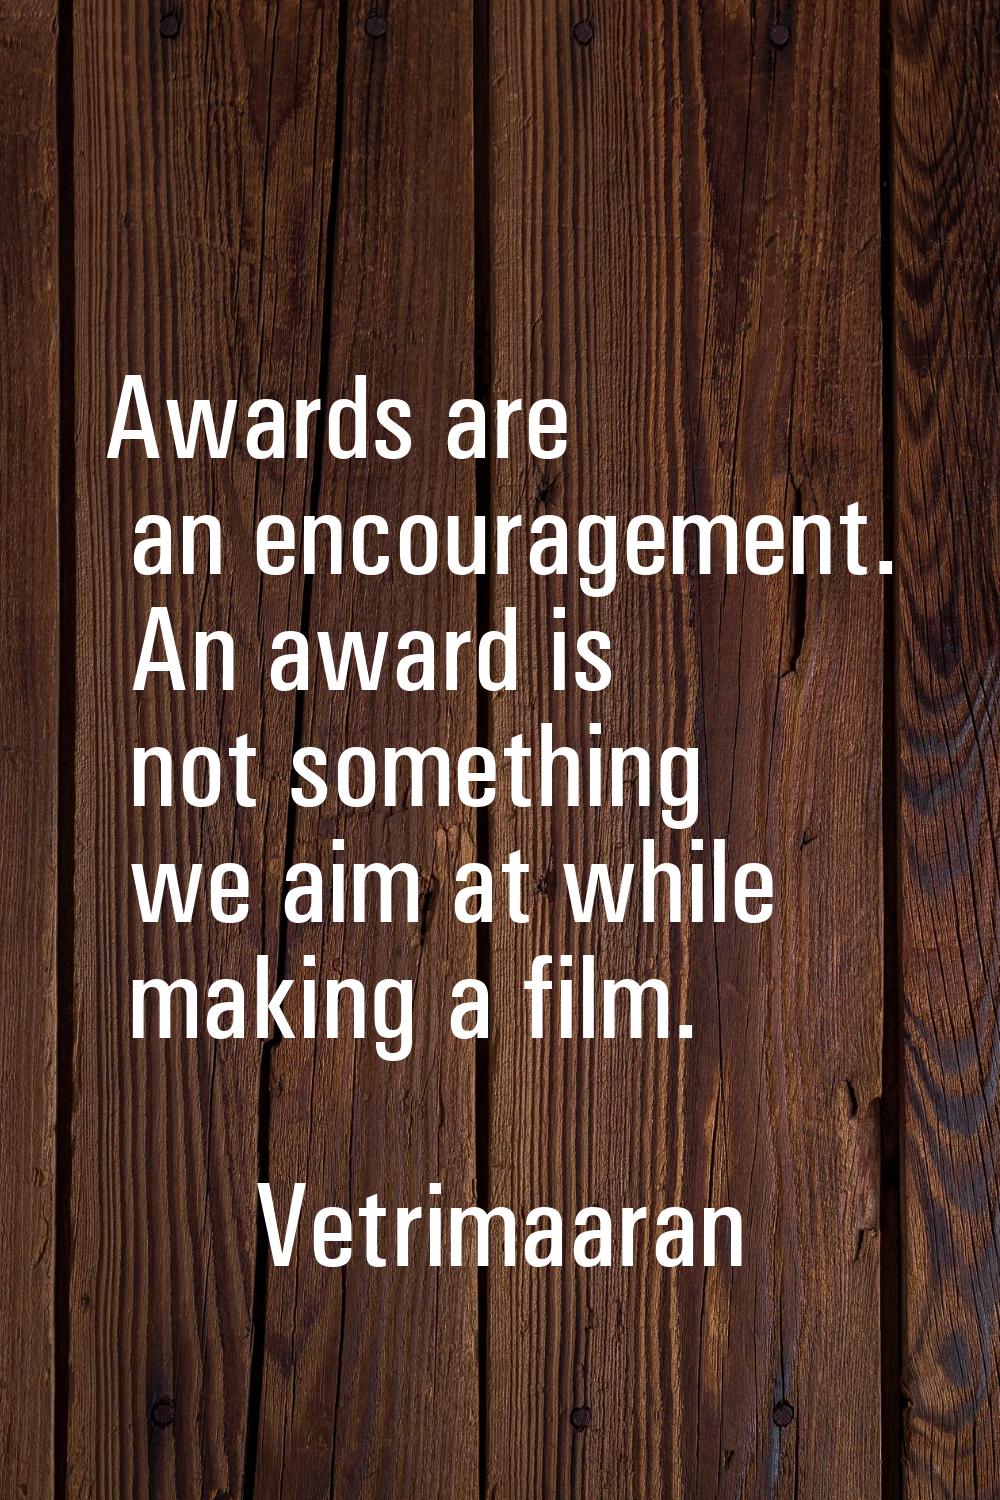 Awards are an encouragement. An award is not something we aim at while making a film.